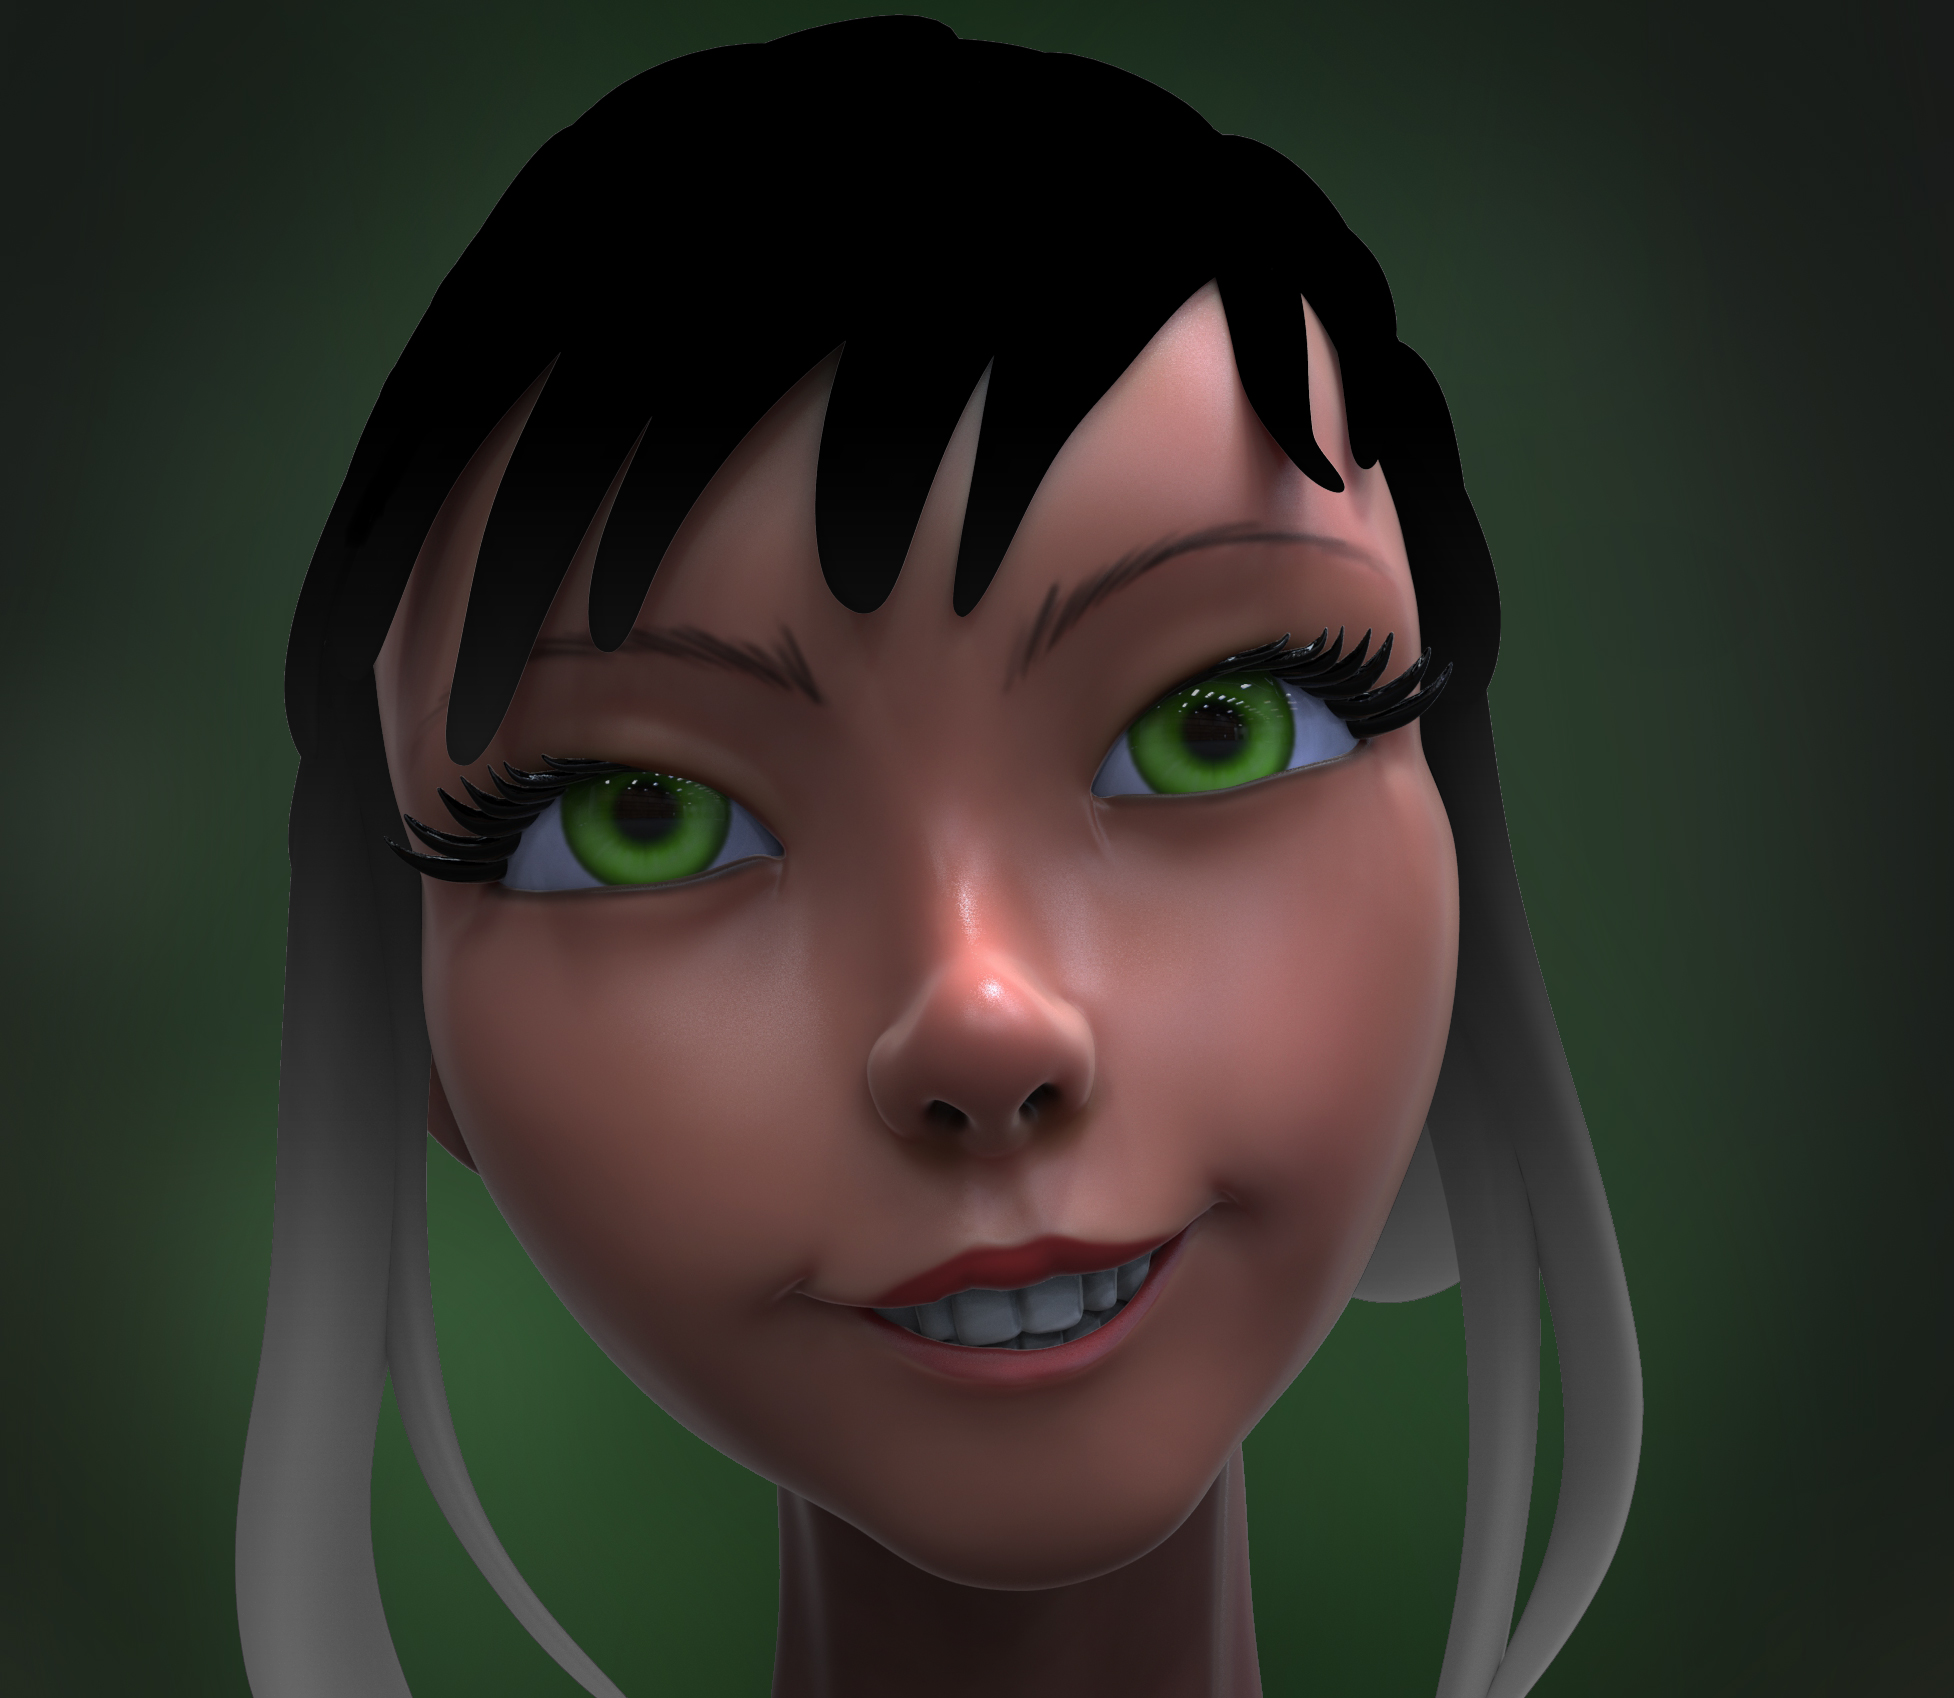 expression_practice_01_by_andra_arts-d7anytk.jpg